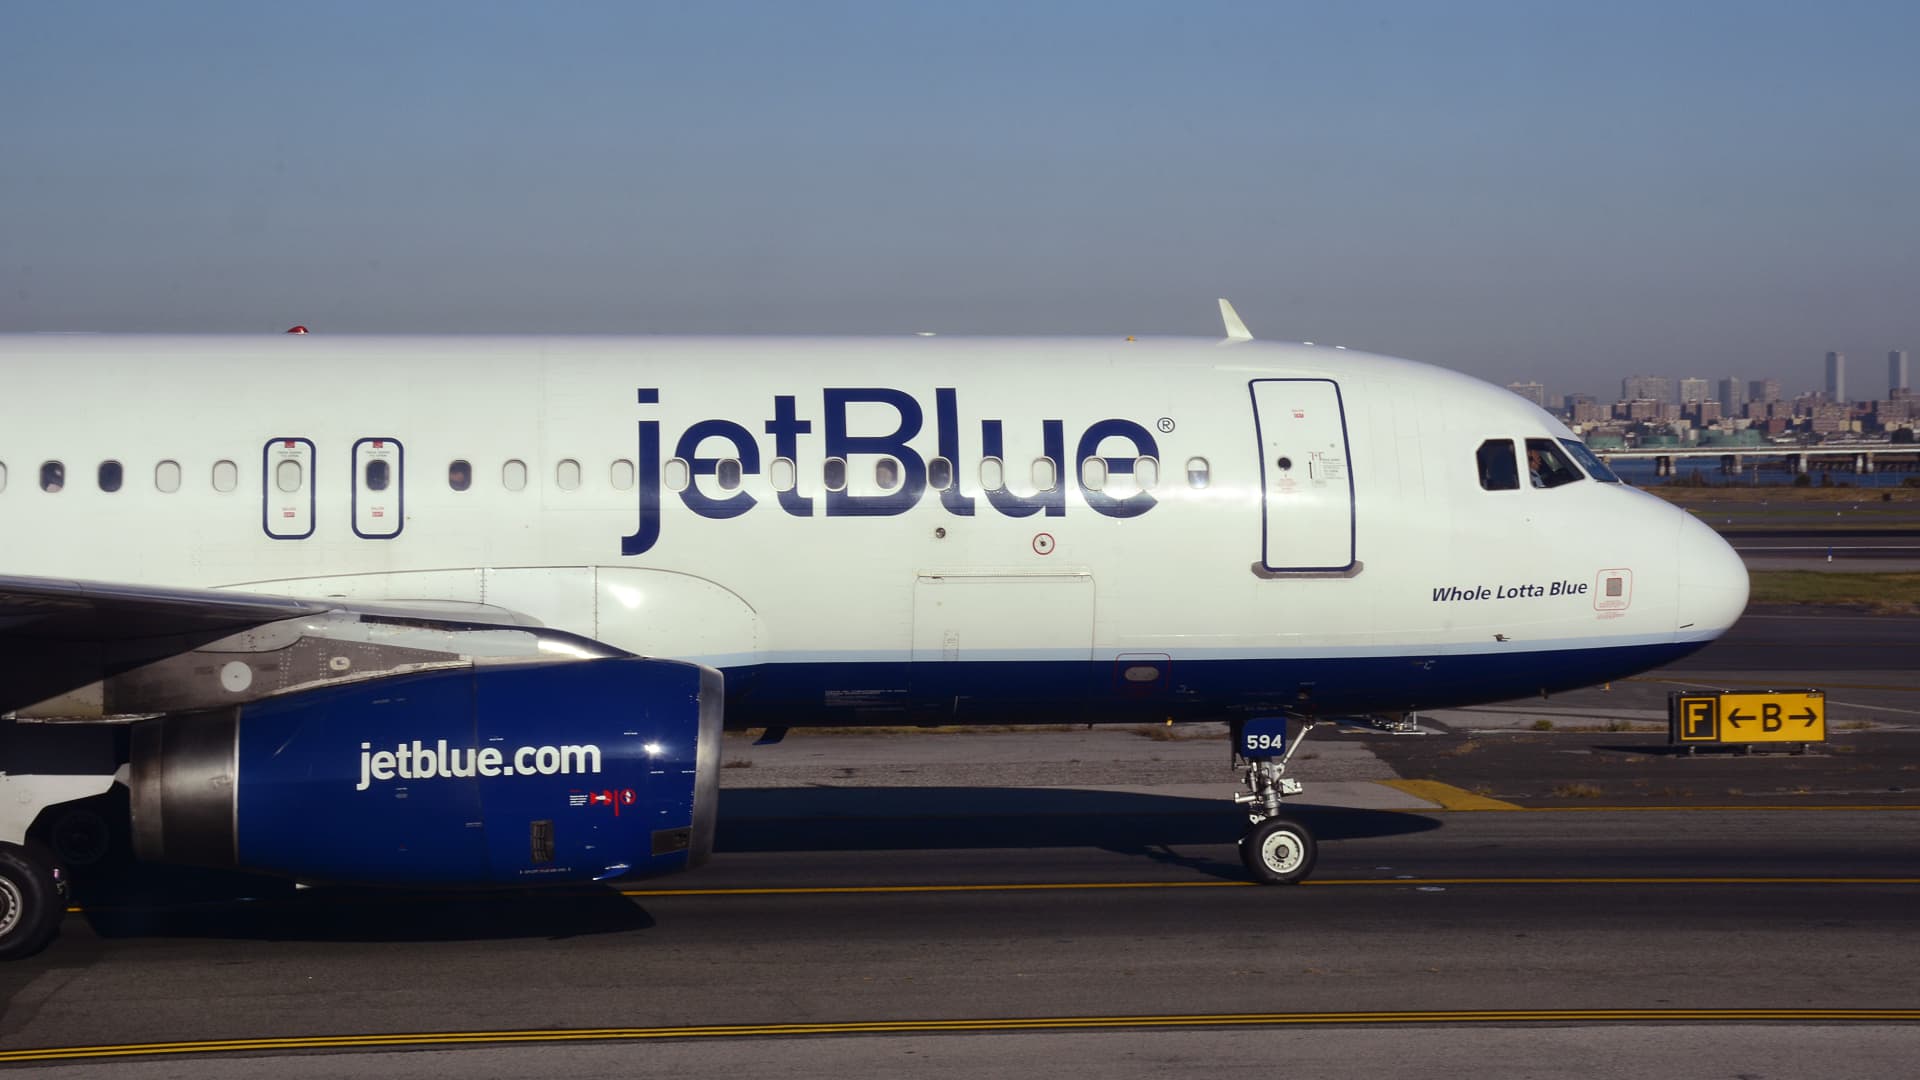 JetBlue ground operations workers seek union vote, major labor group says